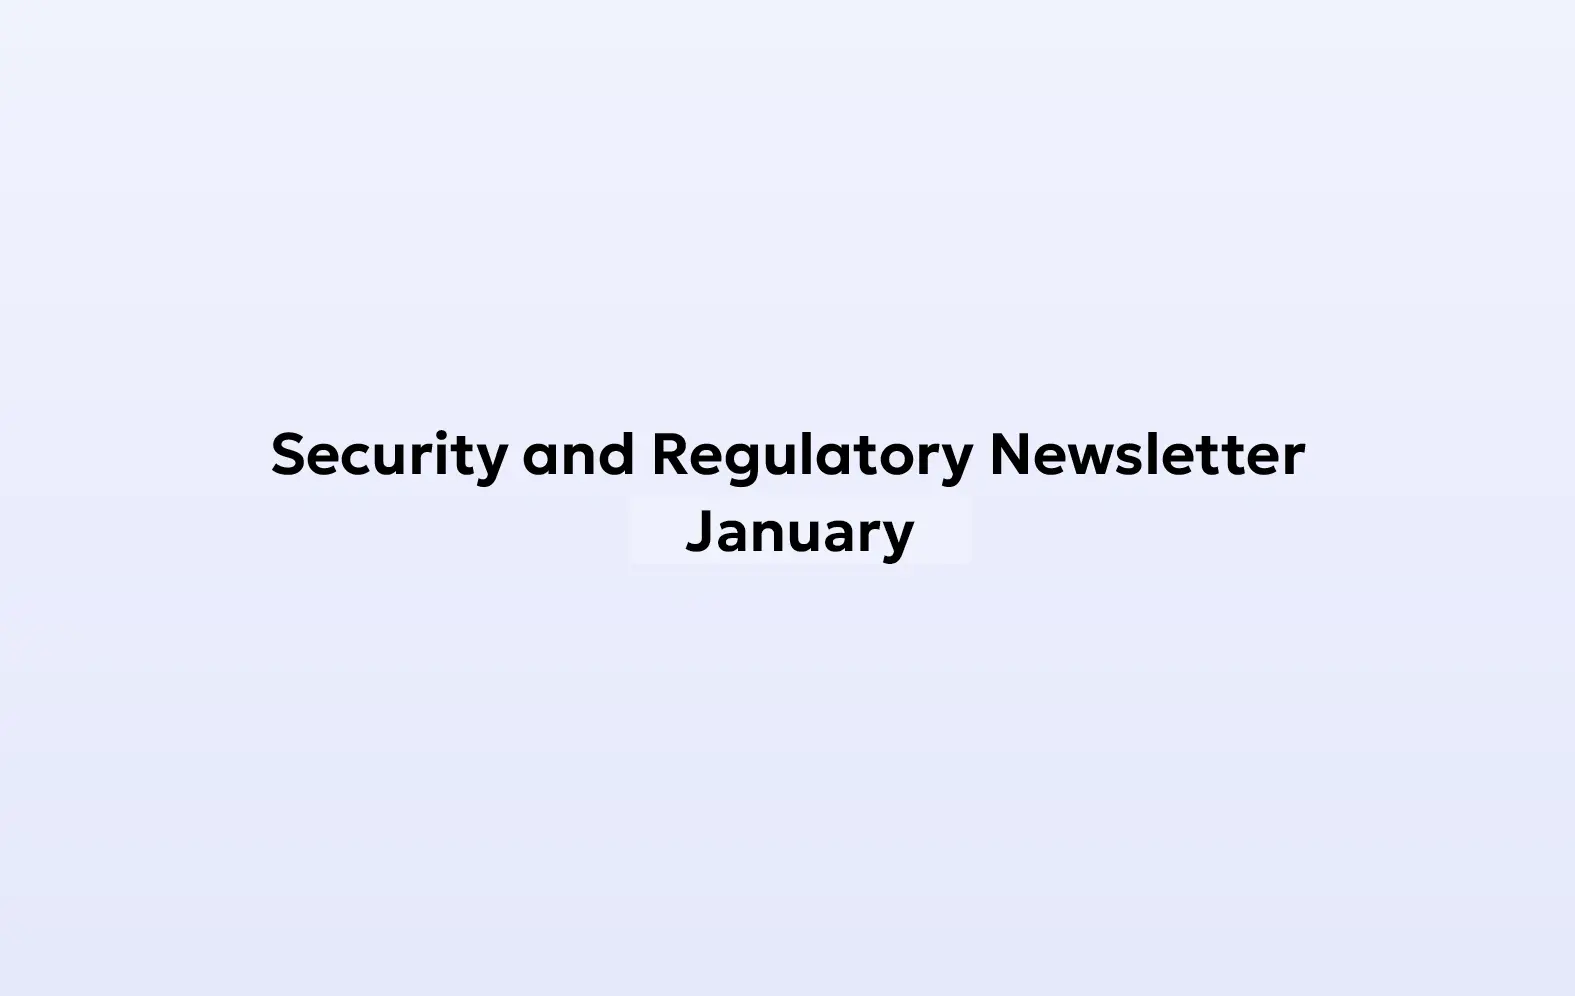 Monthly Security Newsletter - January